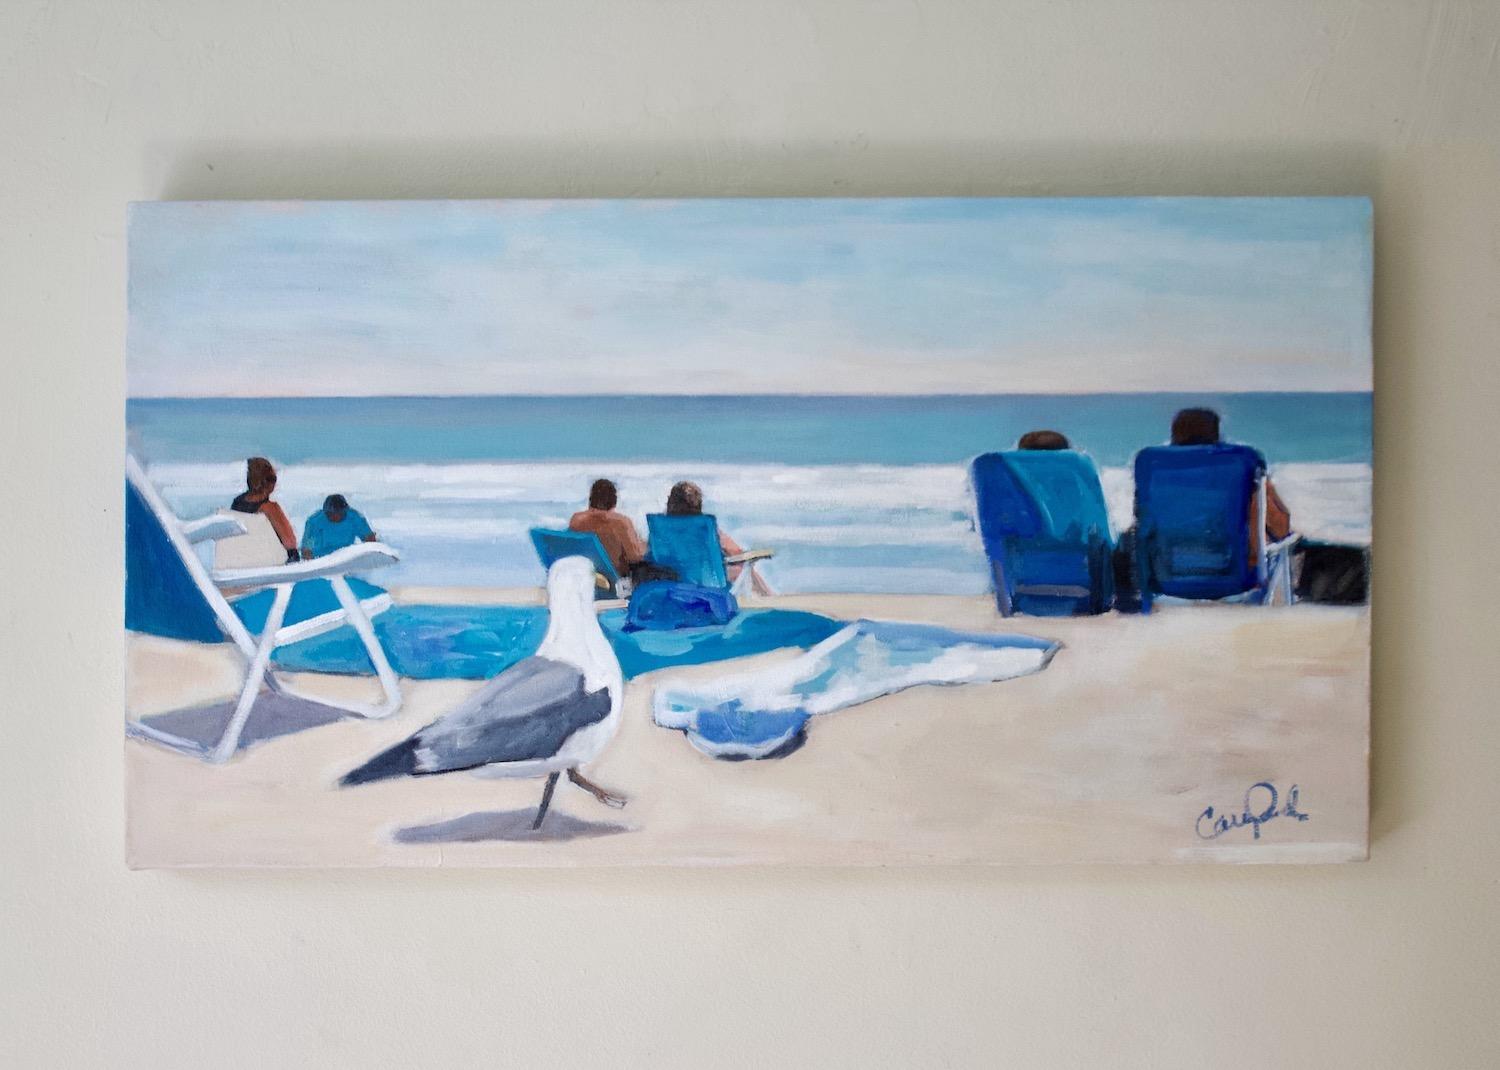 <p>Artist Comments<br>Artist Carey Parks paints a tranquil yet comical scene at a beach. Sunbathers indulge in the magnificent view of the serene ocean, oblivious to a cunning seagull on a covert culinary mission. Various shades of blue dominate